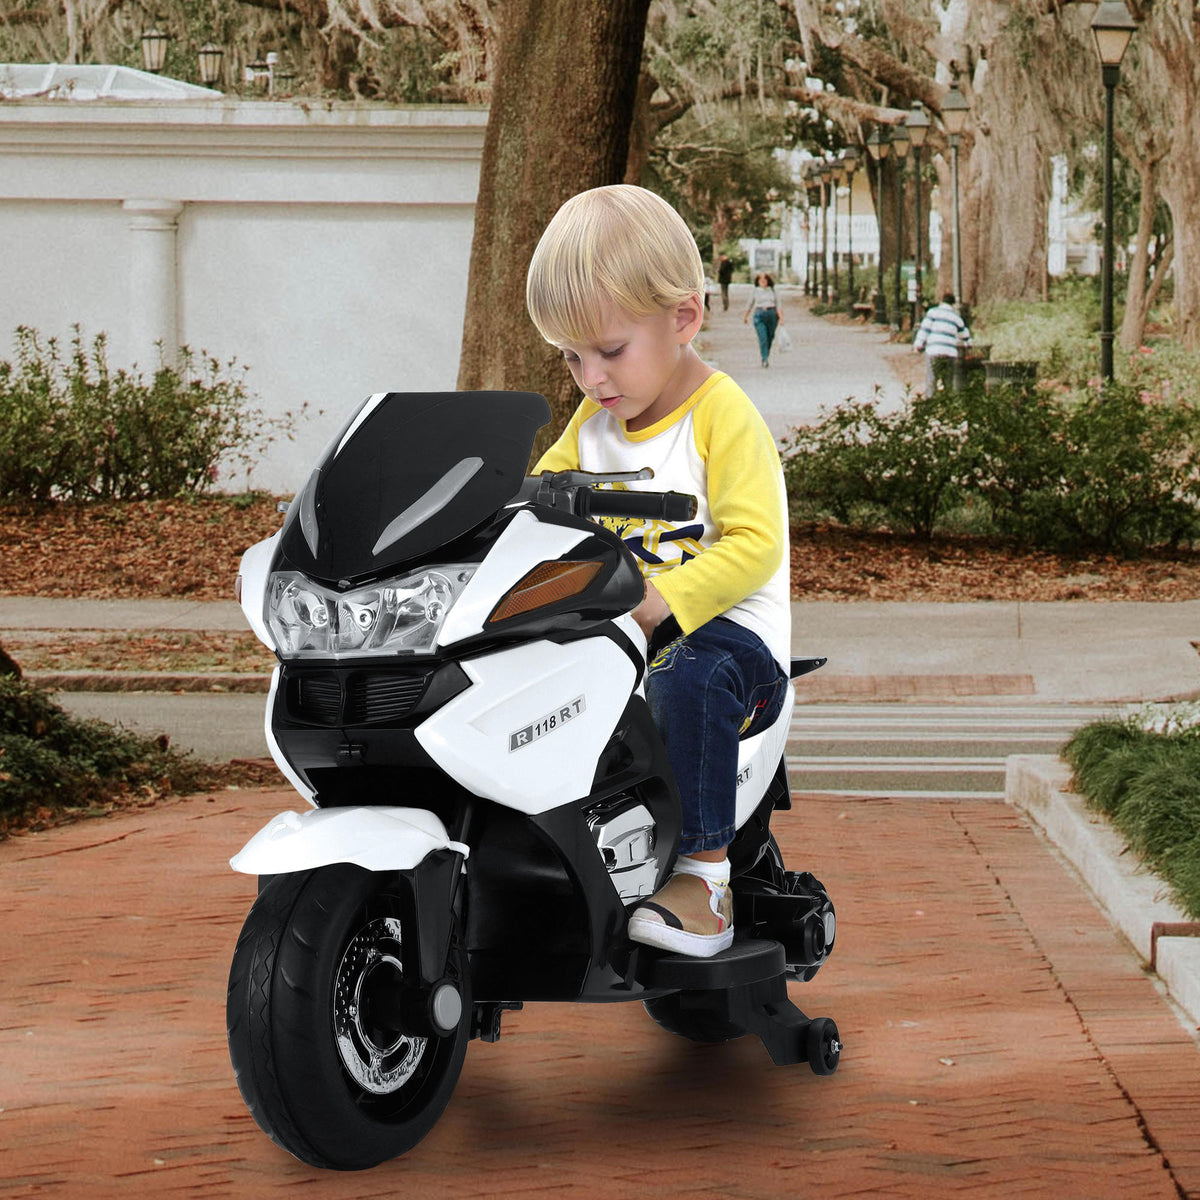 12V Electric Motorcycle for Kids, 2022 Upgrade Kids Motorcycle with Training Wheels for Kids 2-6